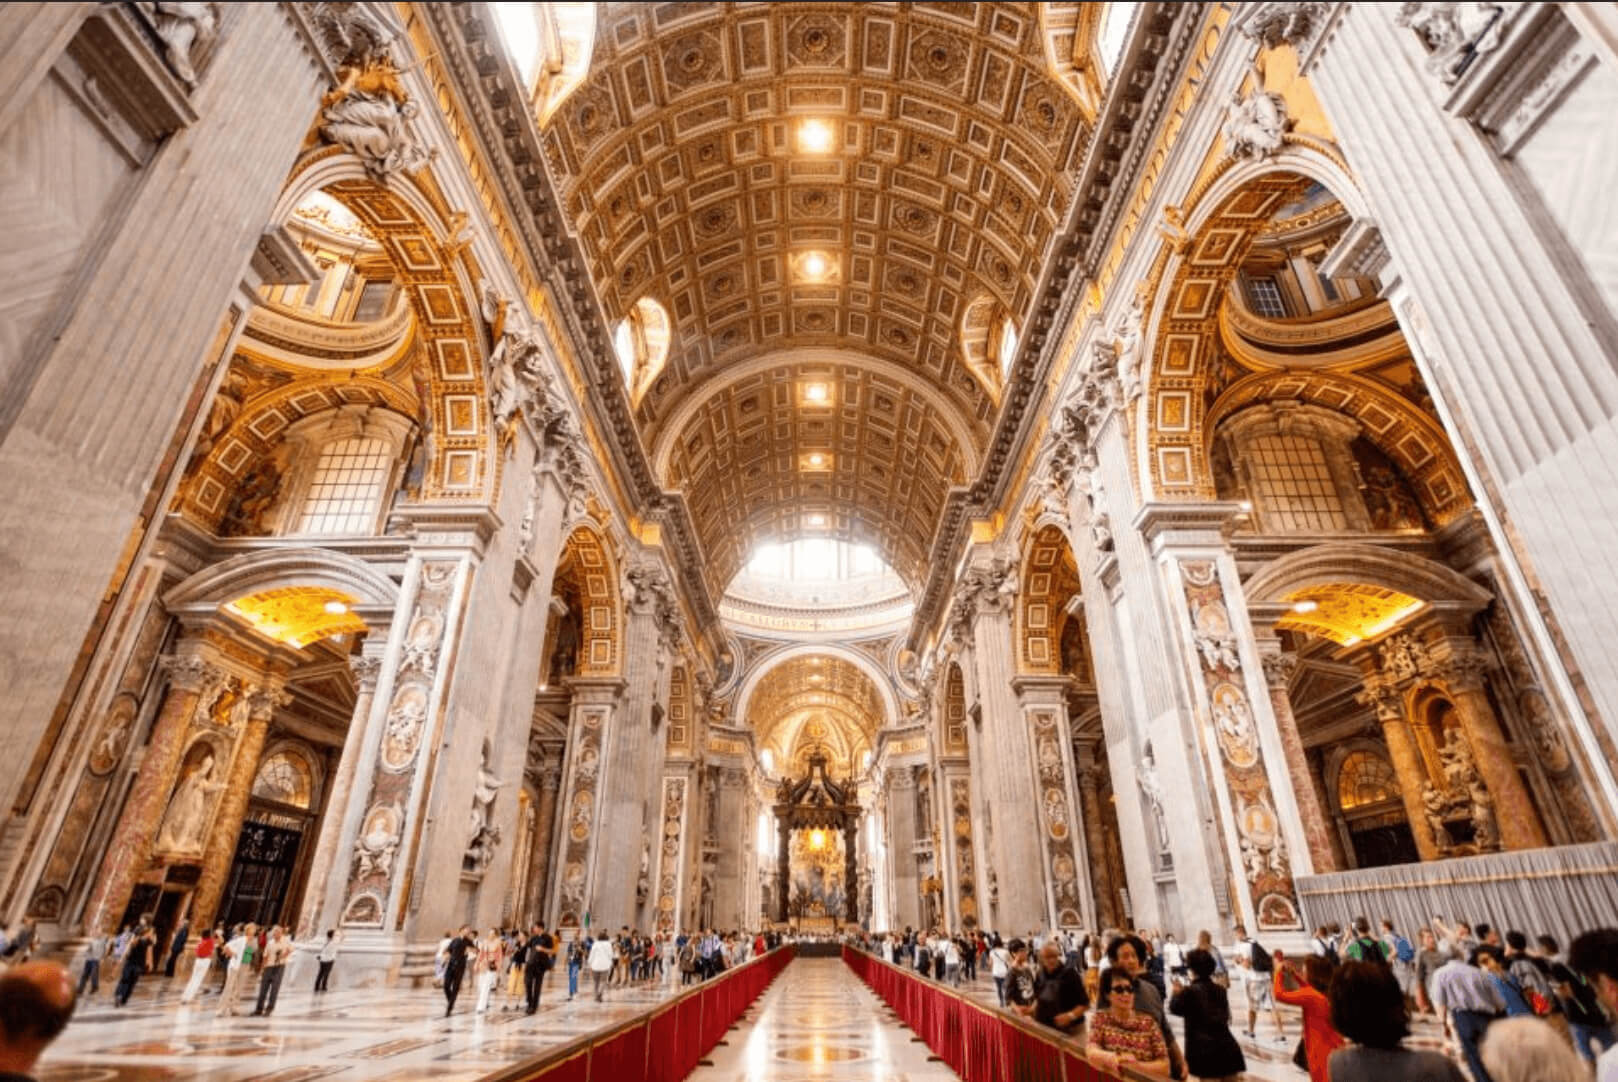 St. Peter's Basilica Tickets and Guided Tours - Explore the Vatican's Famous Landmark